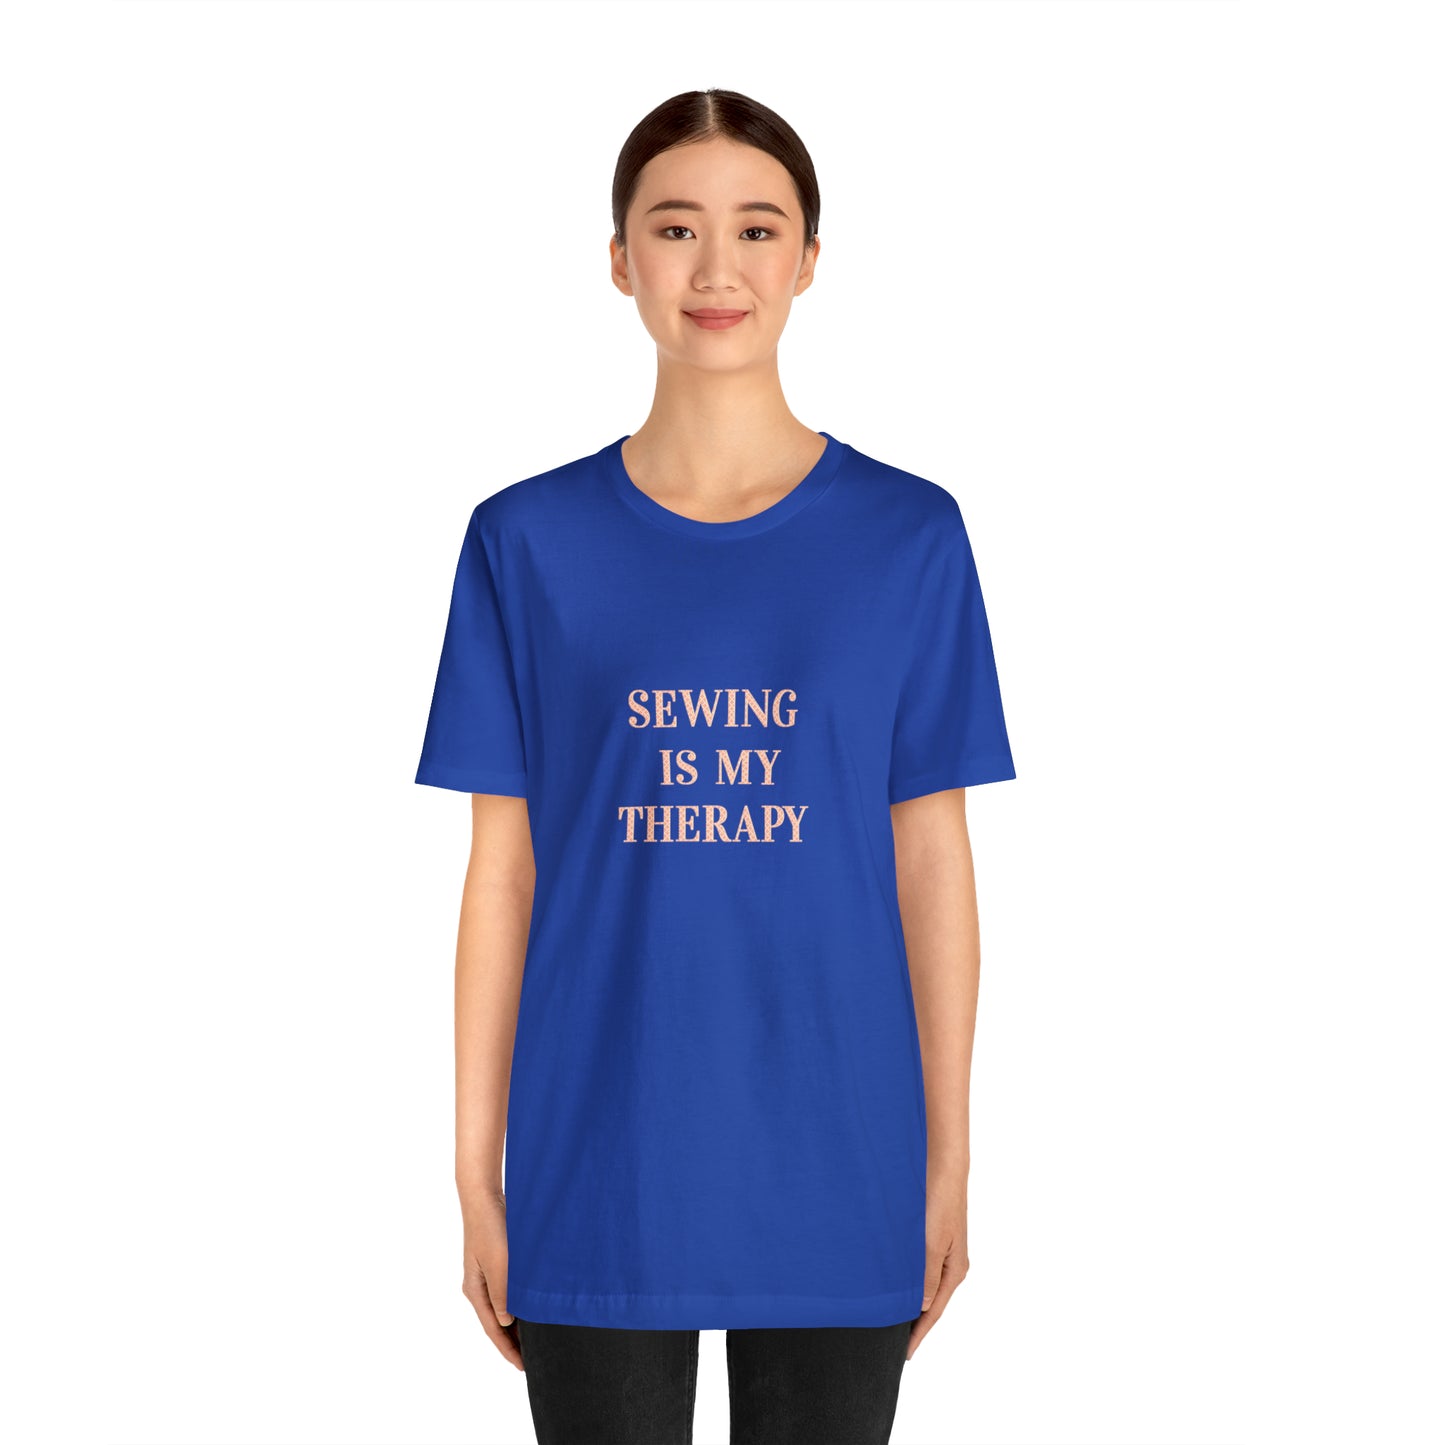 Hobby, Sewing Is My Therapy- Adult, Regular Fit, Soft Cotton, Smaller Size Image, T-shirt